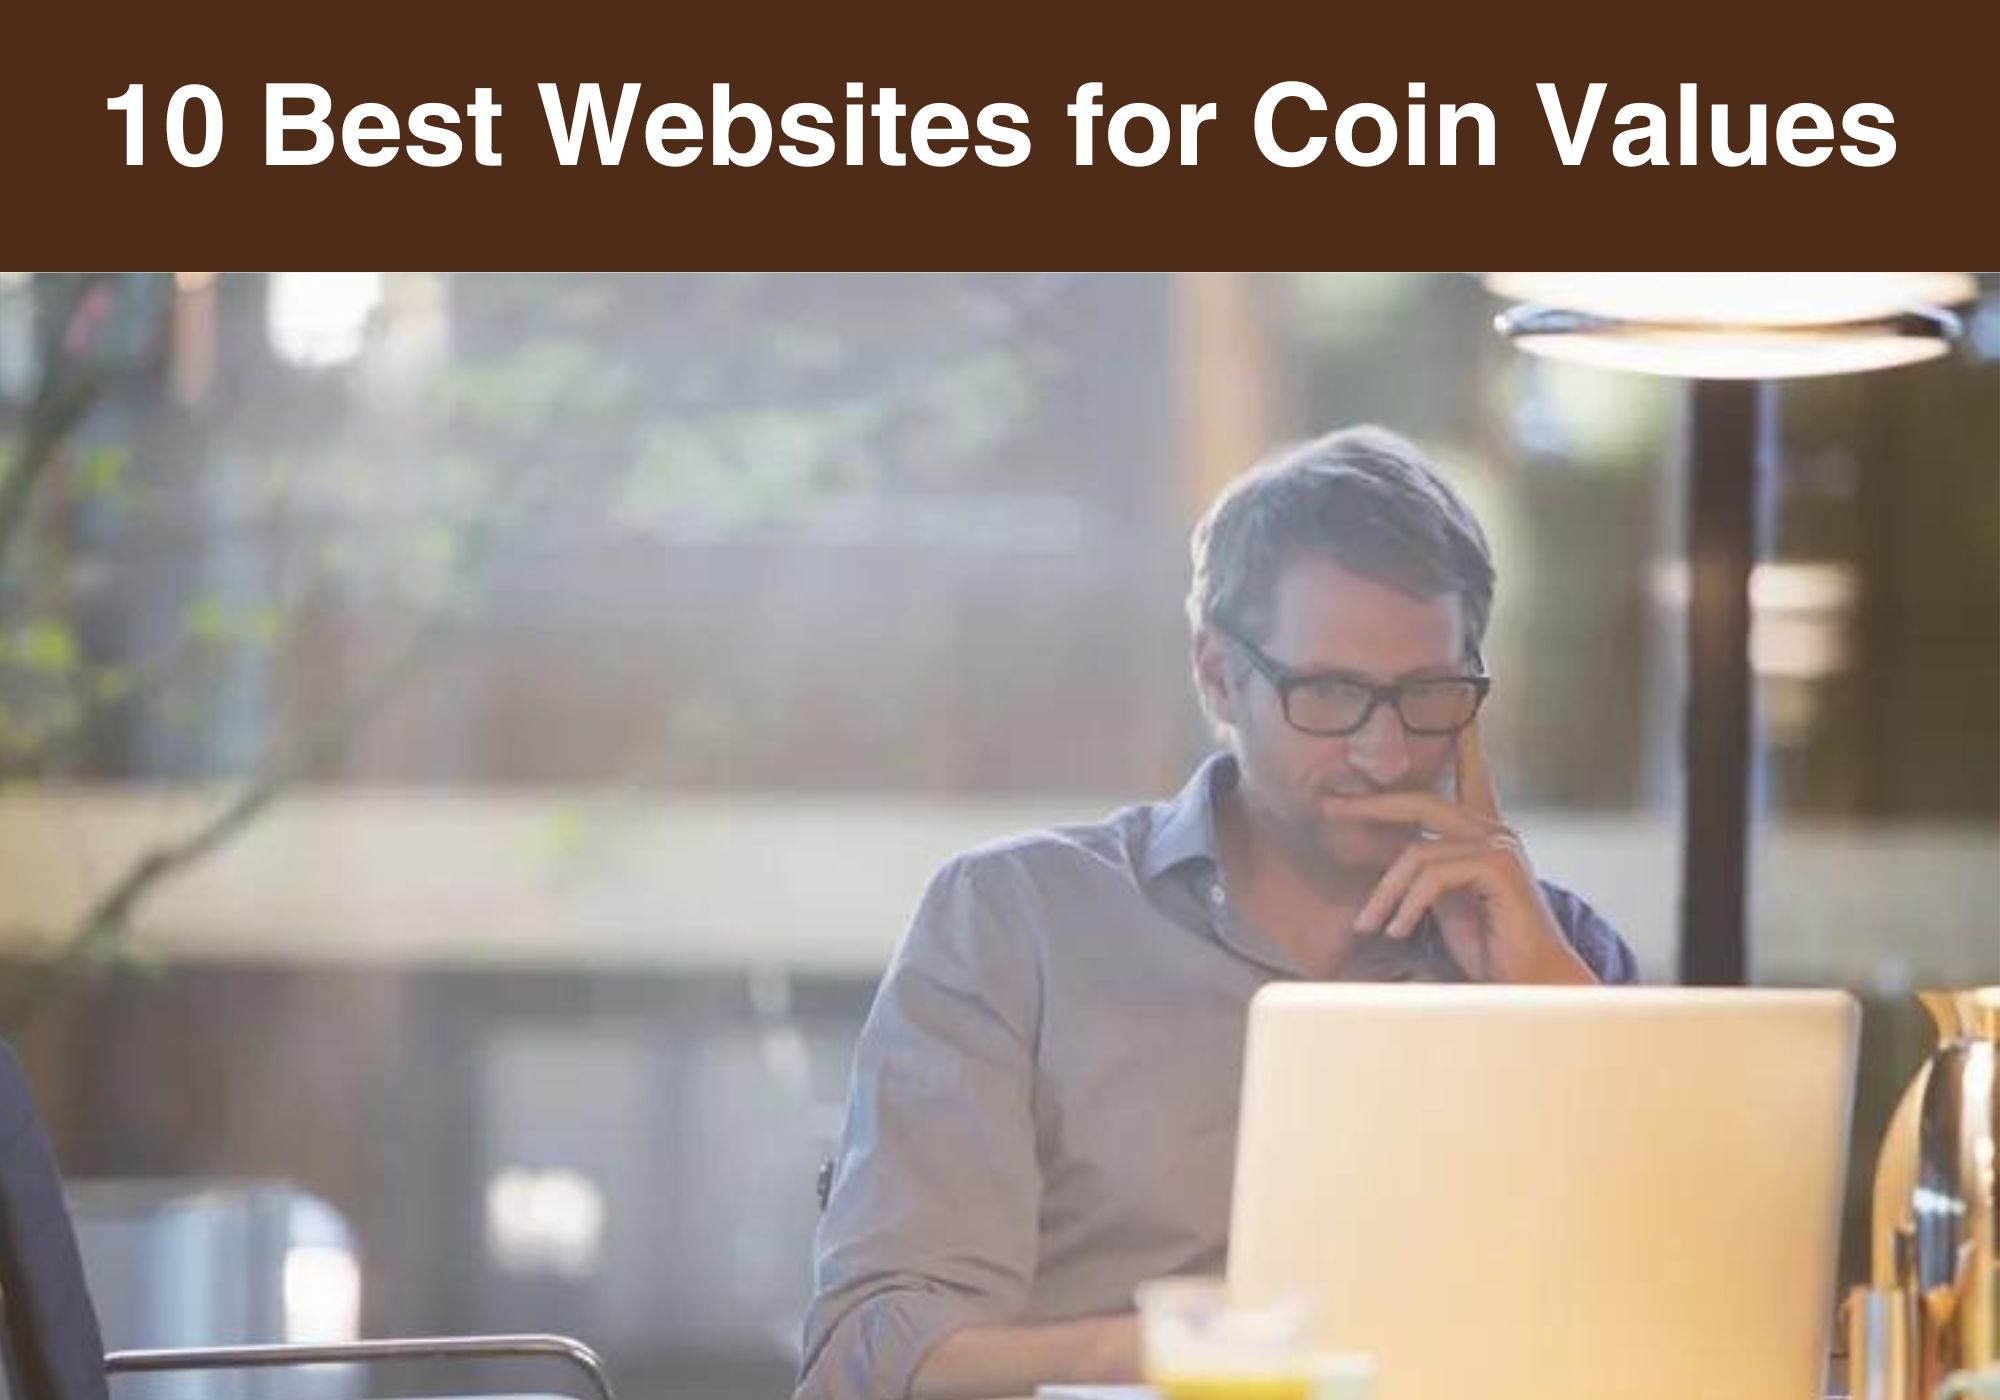 10 Best Websites for Coin Values